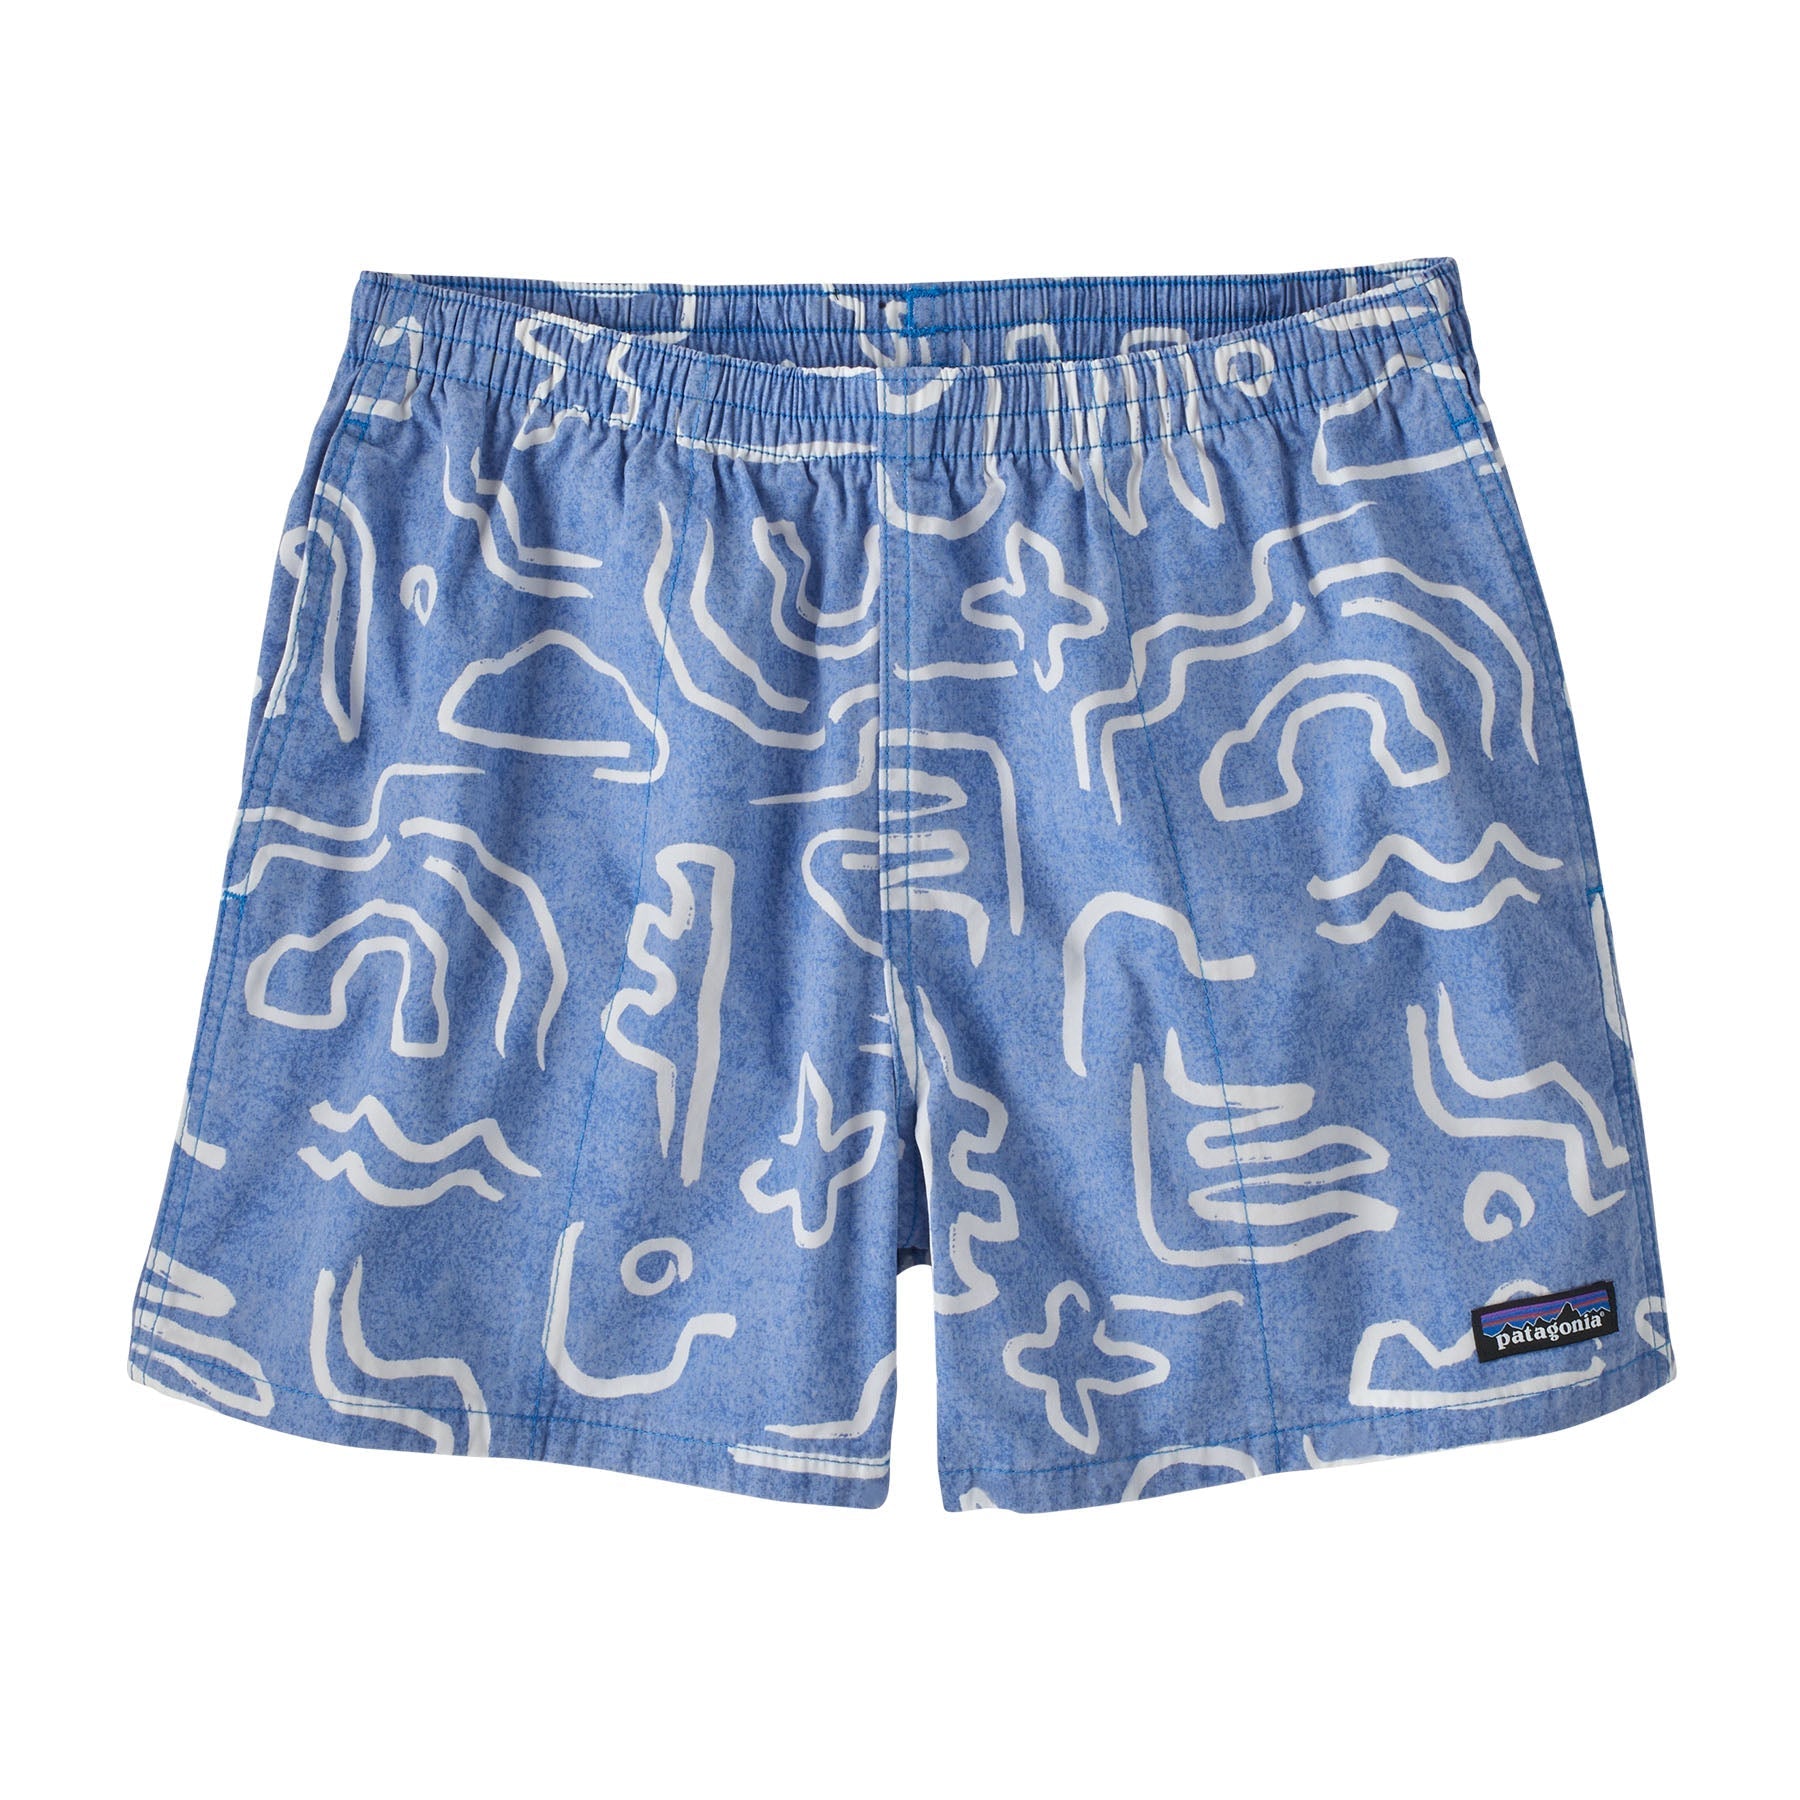 Women's Funhoggers Shorts in Channel Islands: Vessel Blue | Patagonia Bend